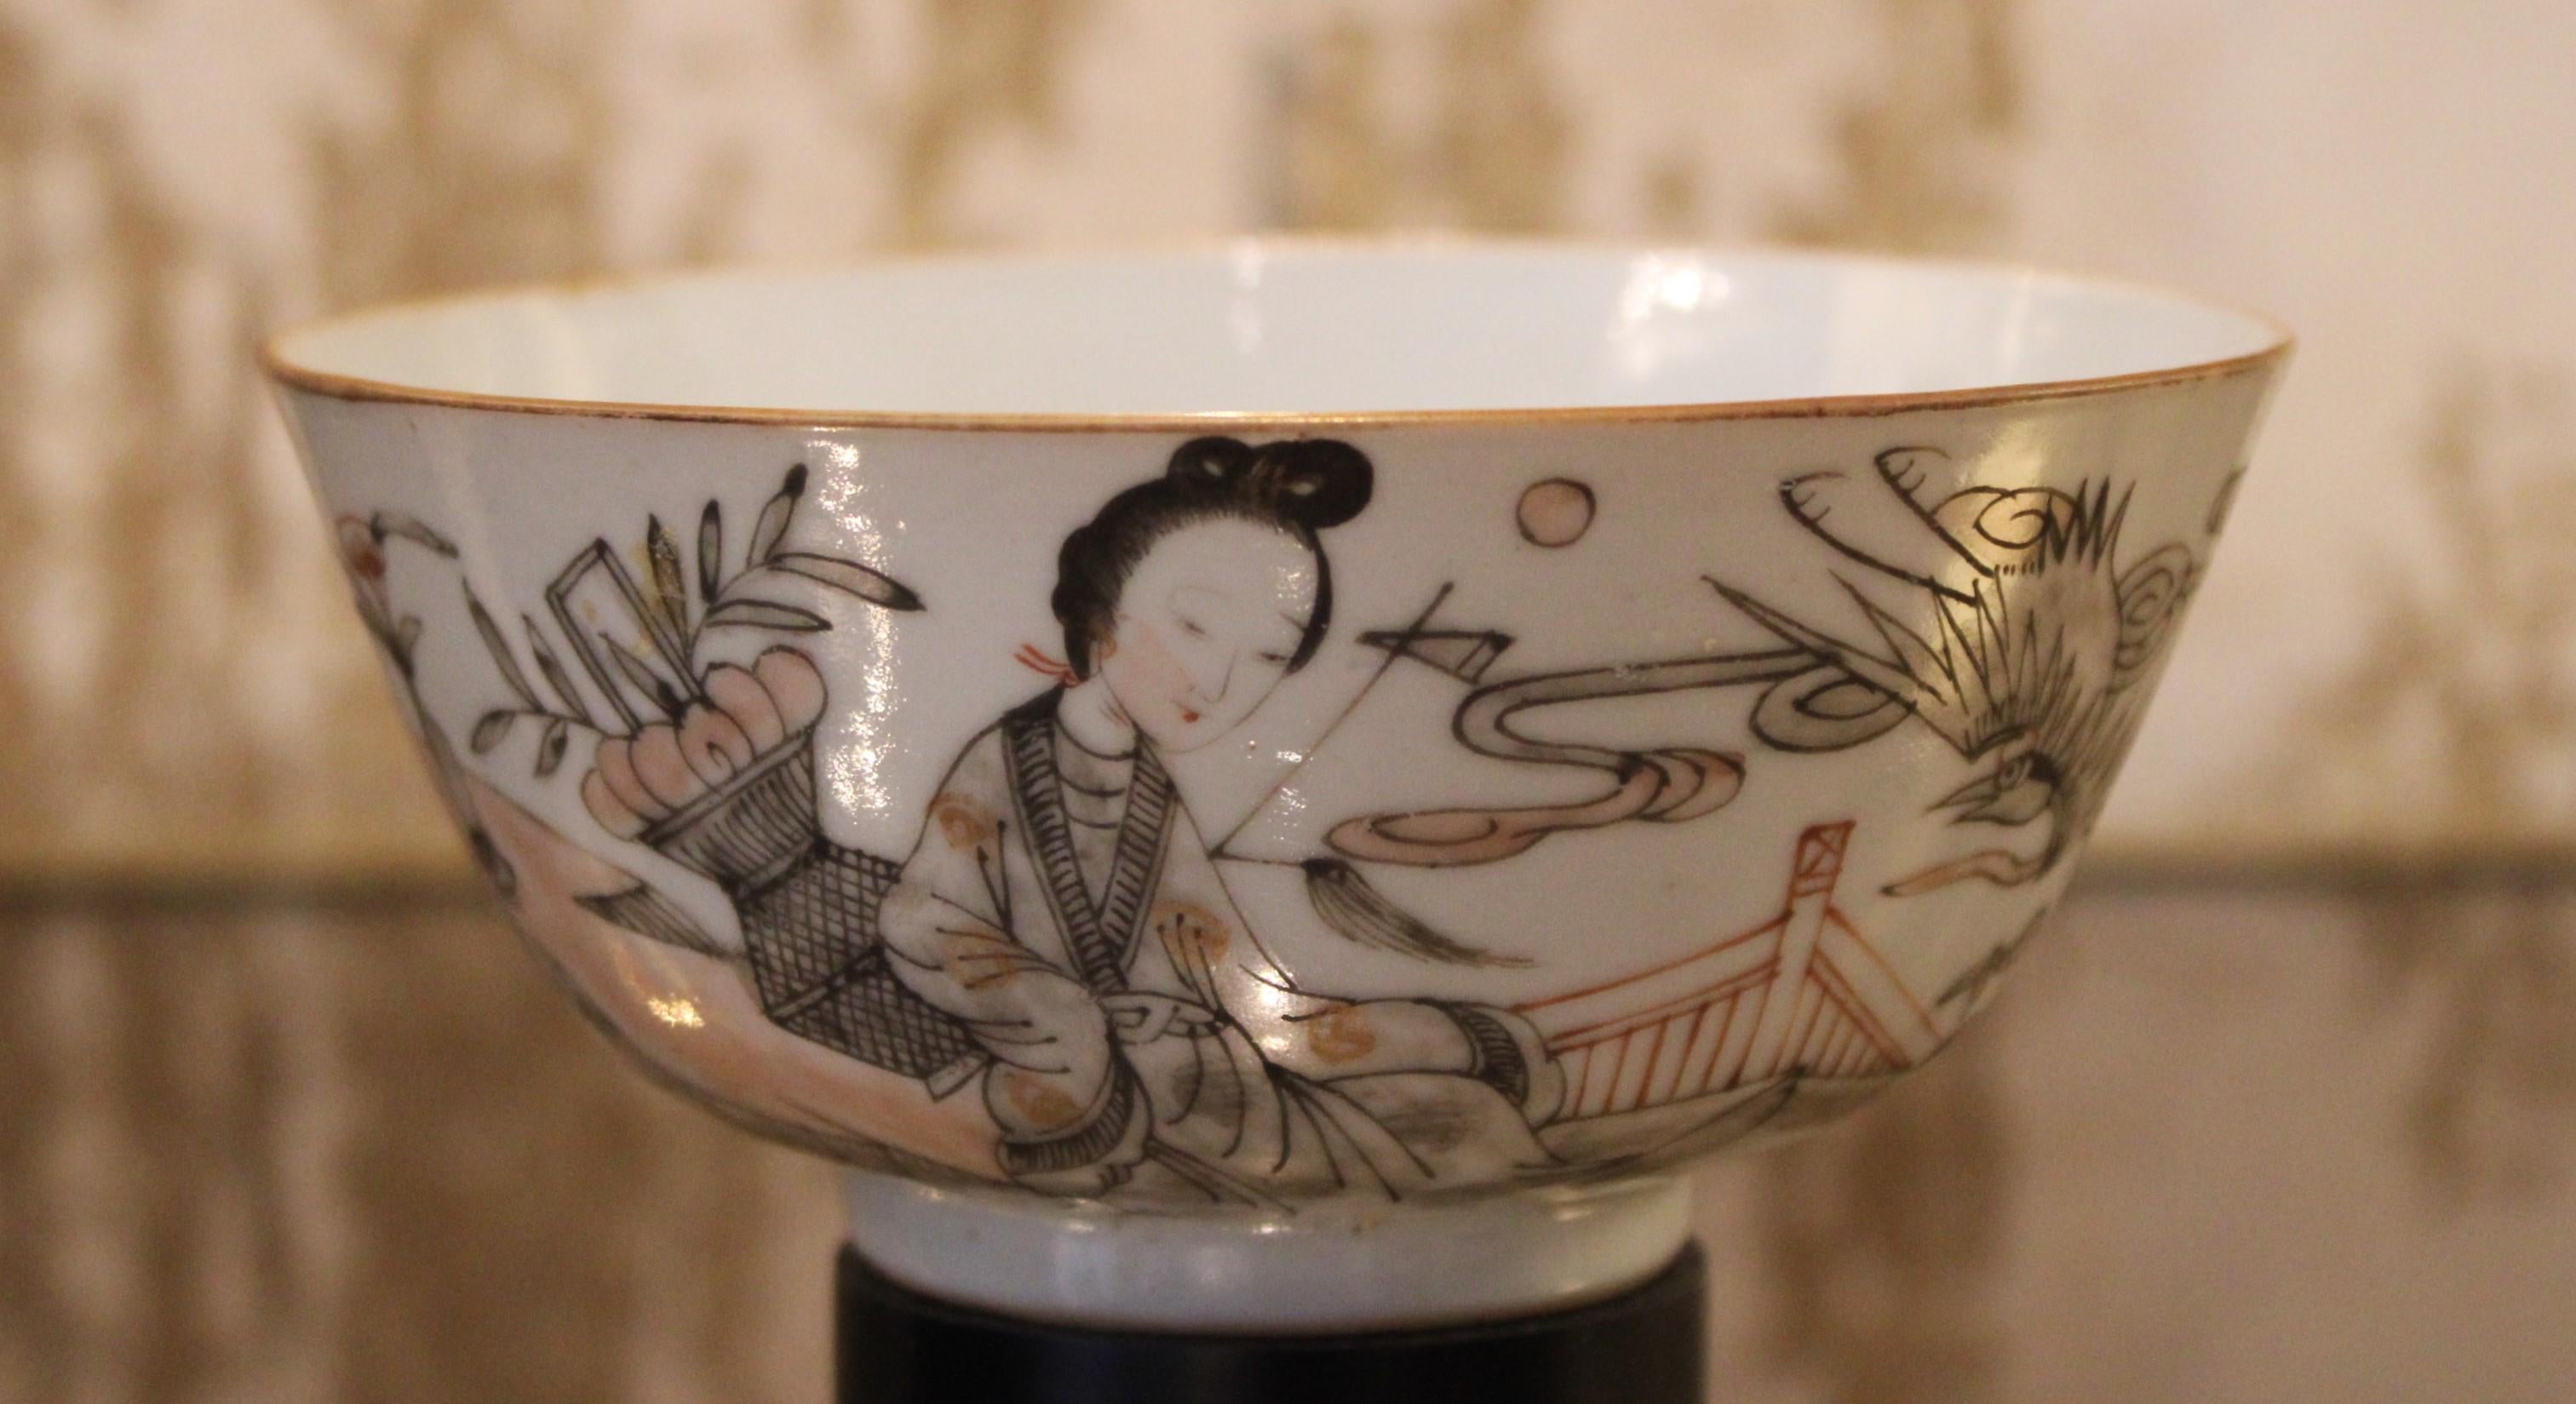 Late 19th century Chinese porcelain bowl